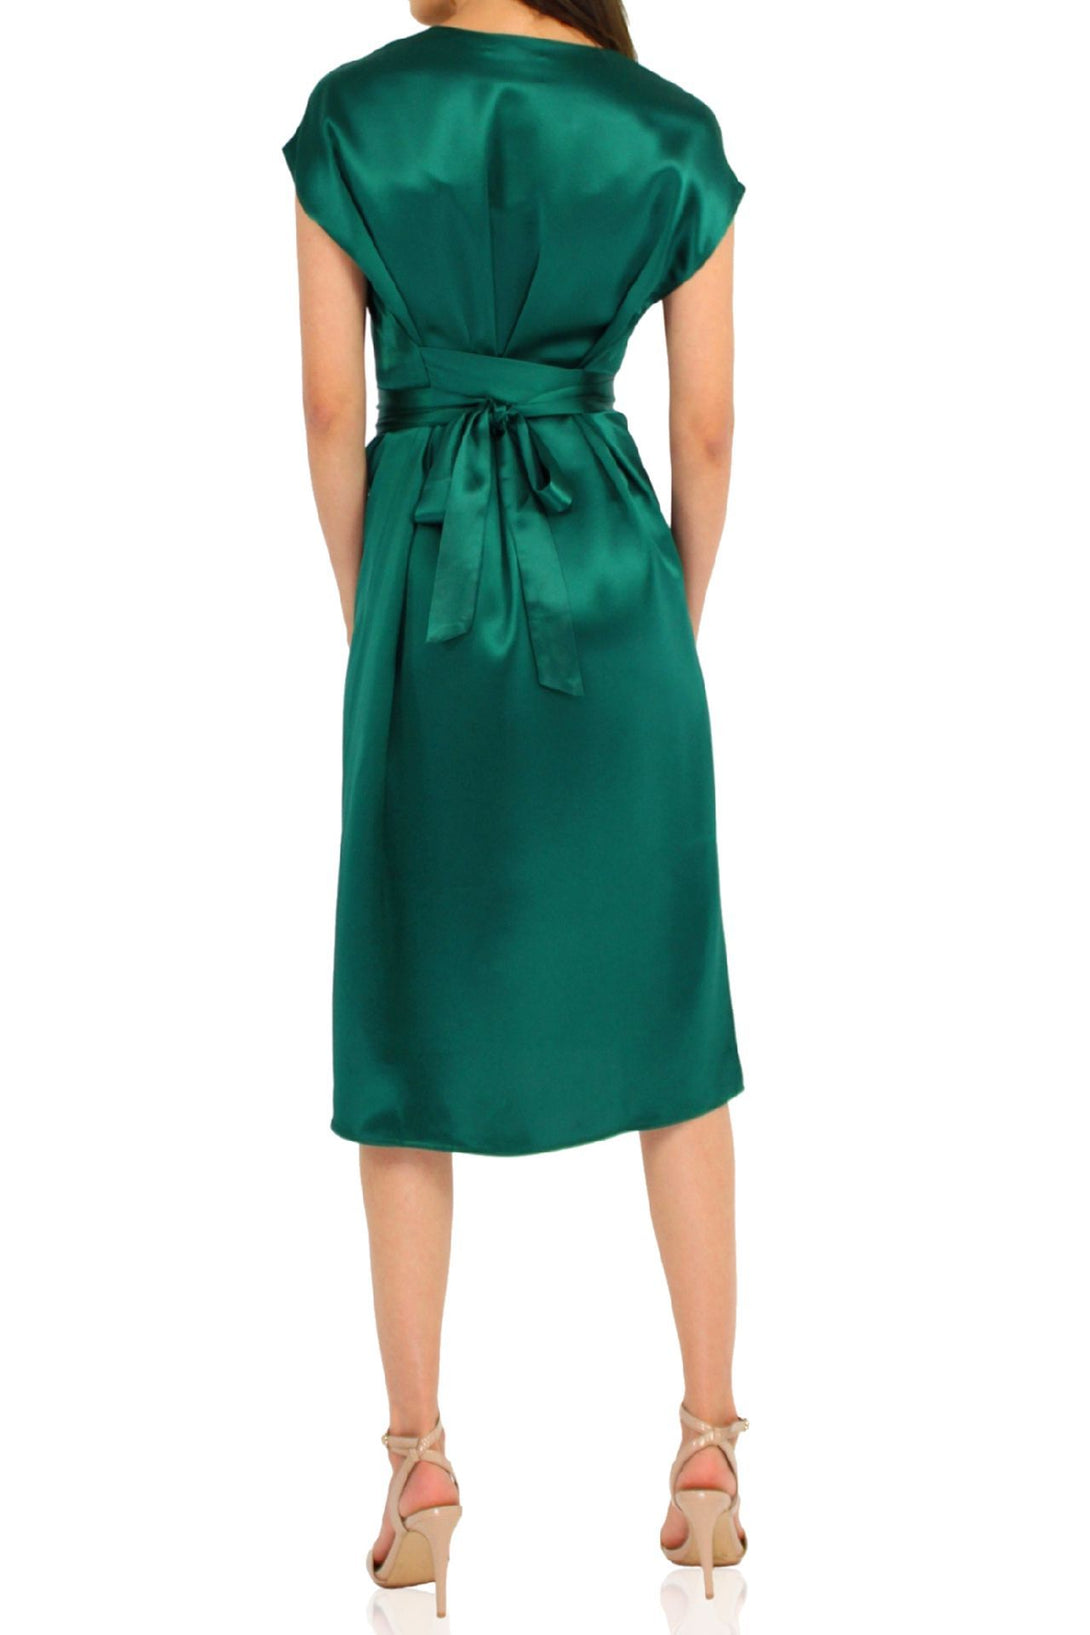 Slip-Dress-For-Womens-In-Green-By-kyle-Richard